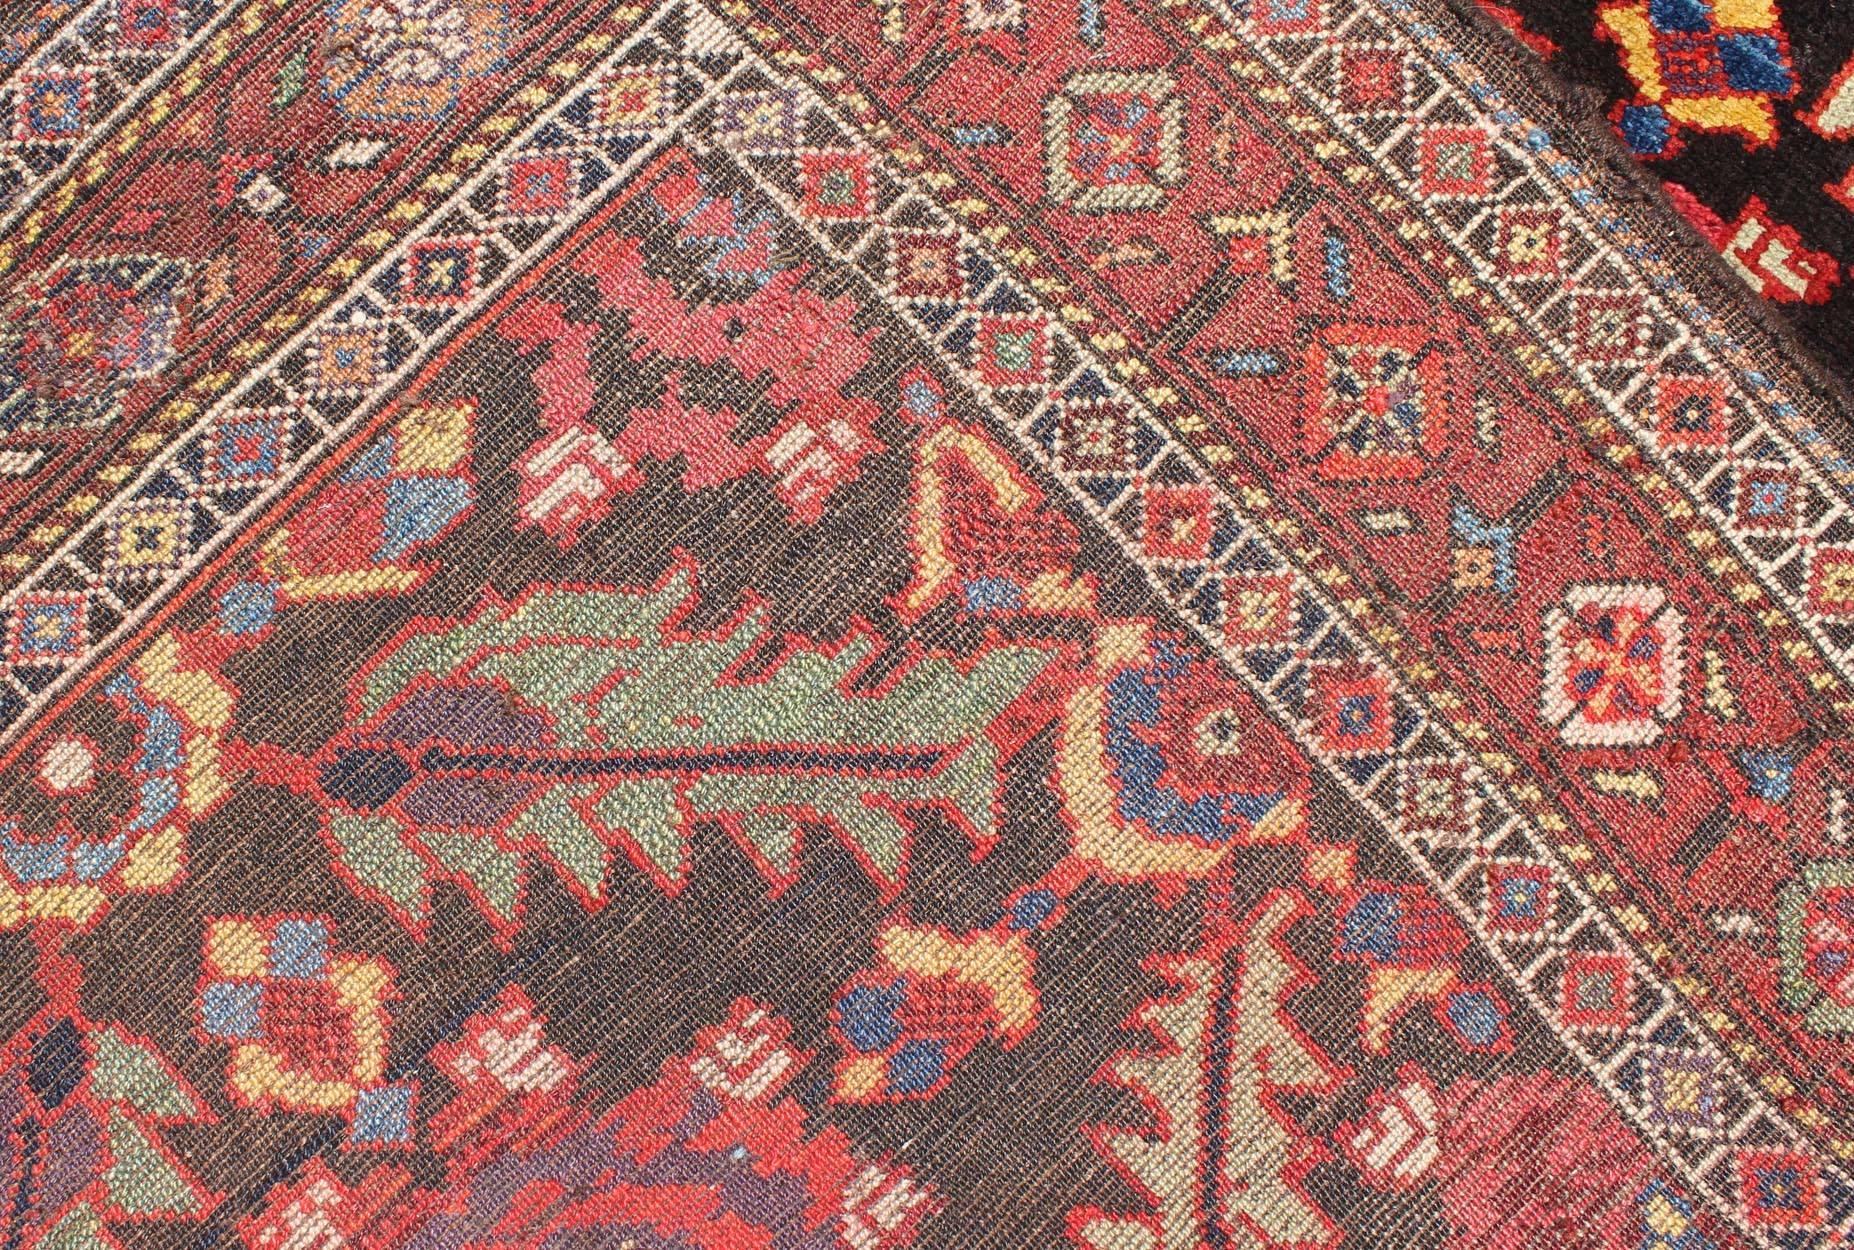 Colorful Jewel-Toned Antique Caucasian Karabagh Runner with Tribal Design For Sale 2